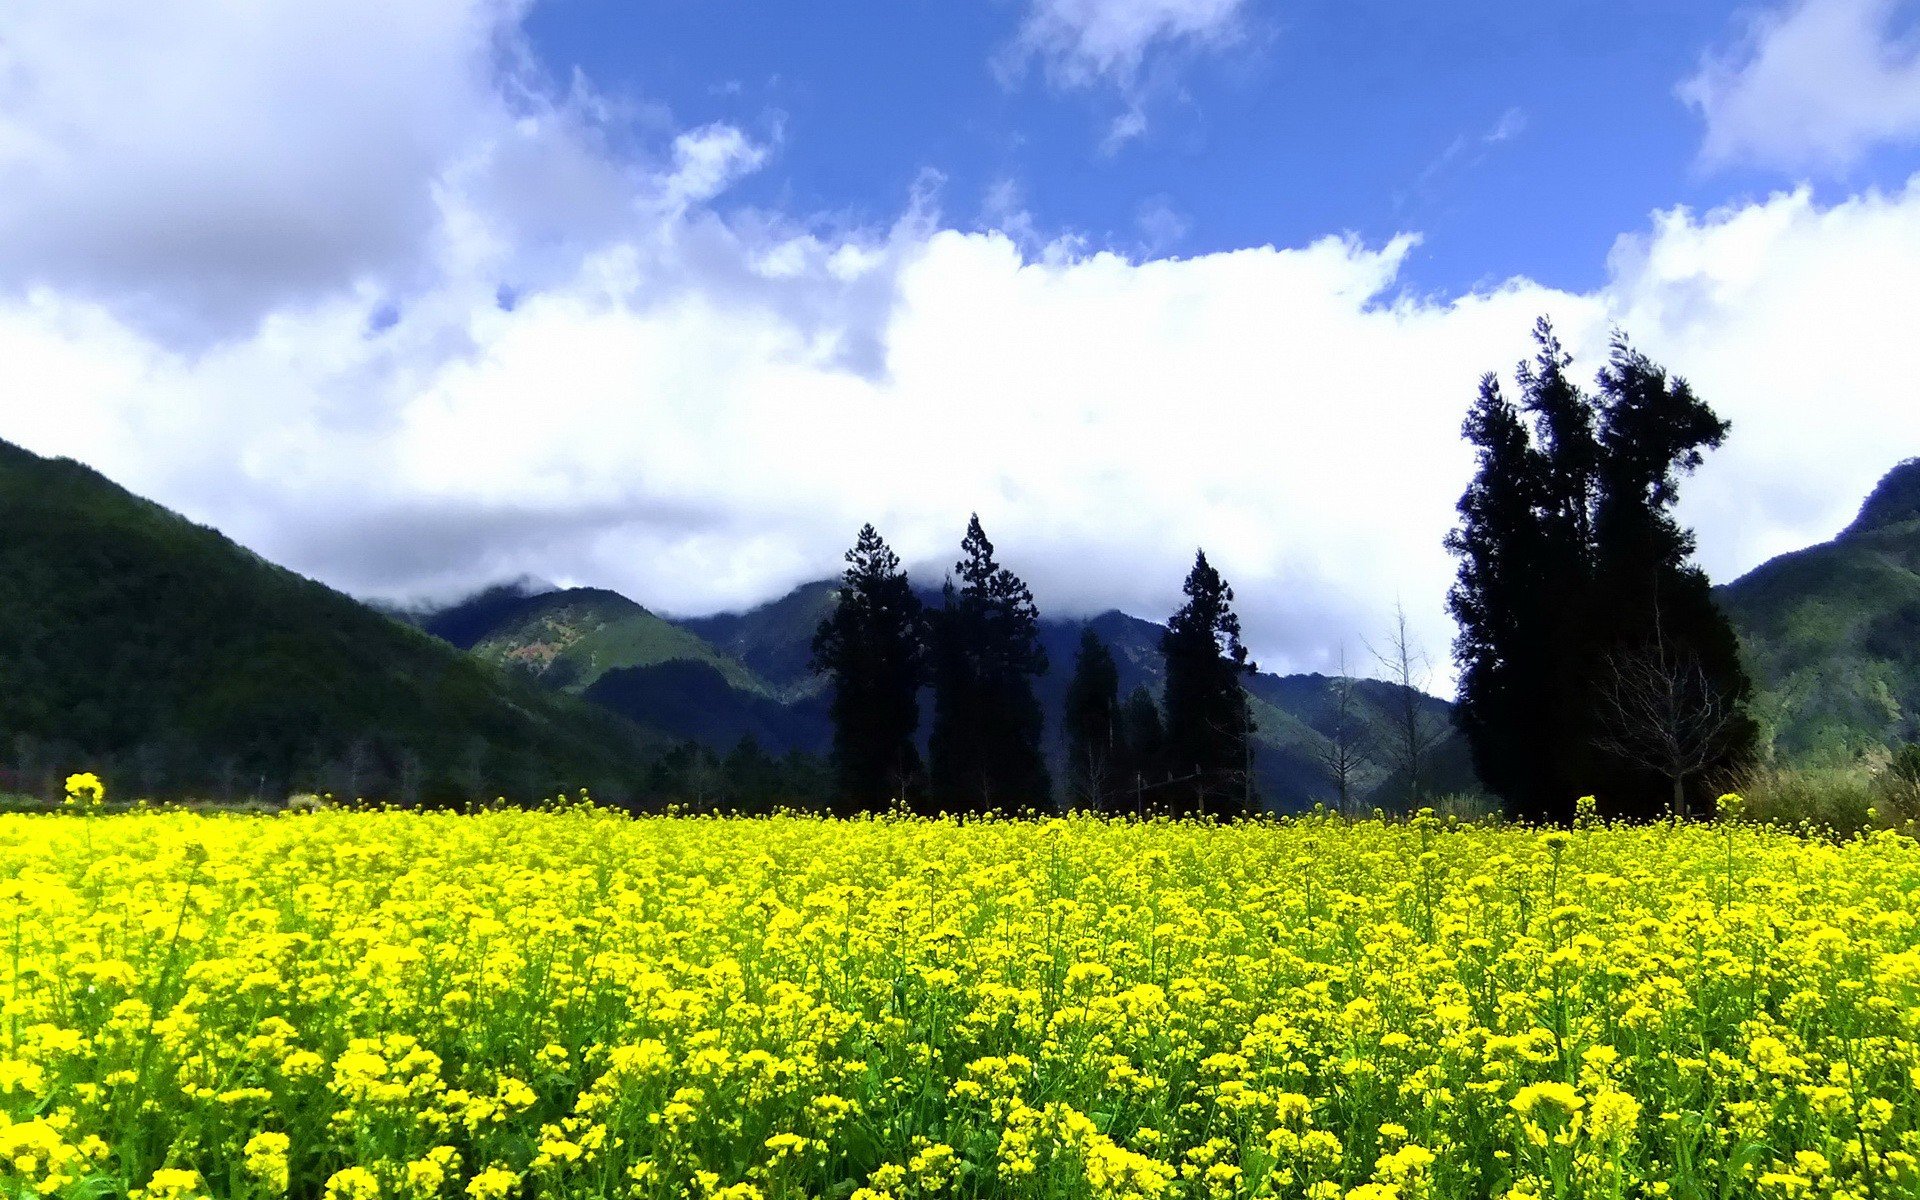 mountains, Clouds, Landscapes, Nature, Trees, Flowers, Hills, Yellow, Flowers, Skies Wallpaper